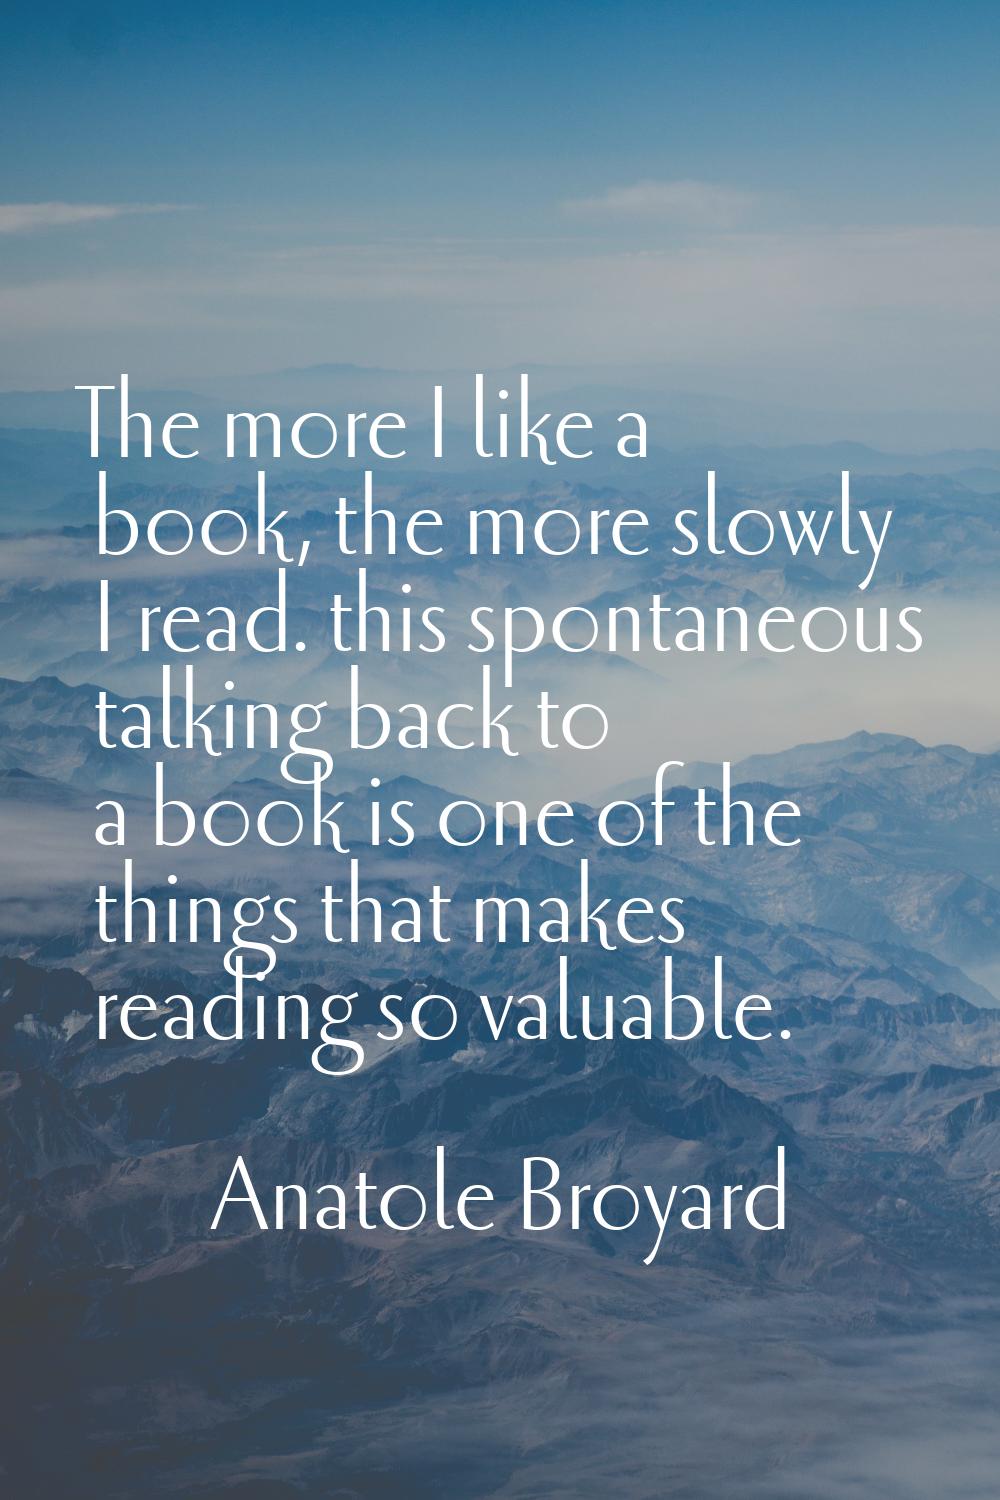 The more I like a book, the more slowly I read. this spontaneous talking back to a book is one of t